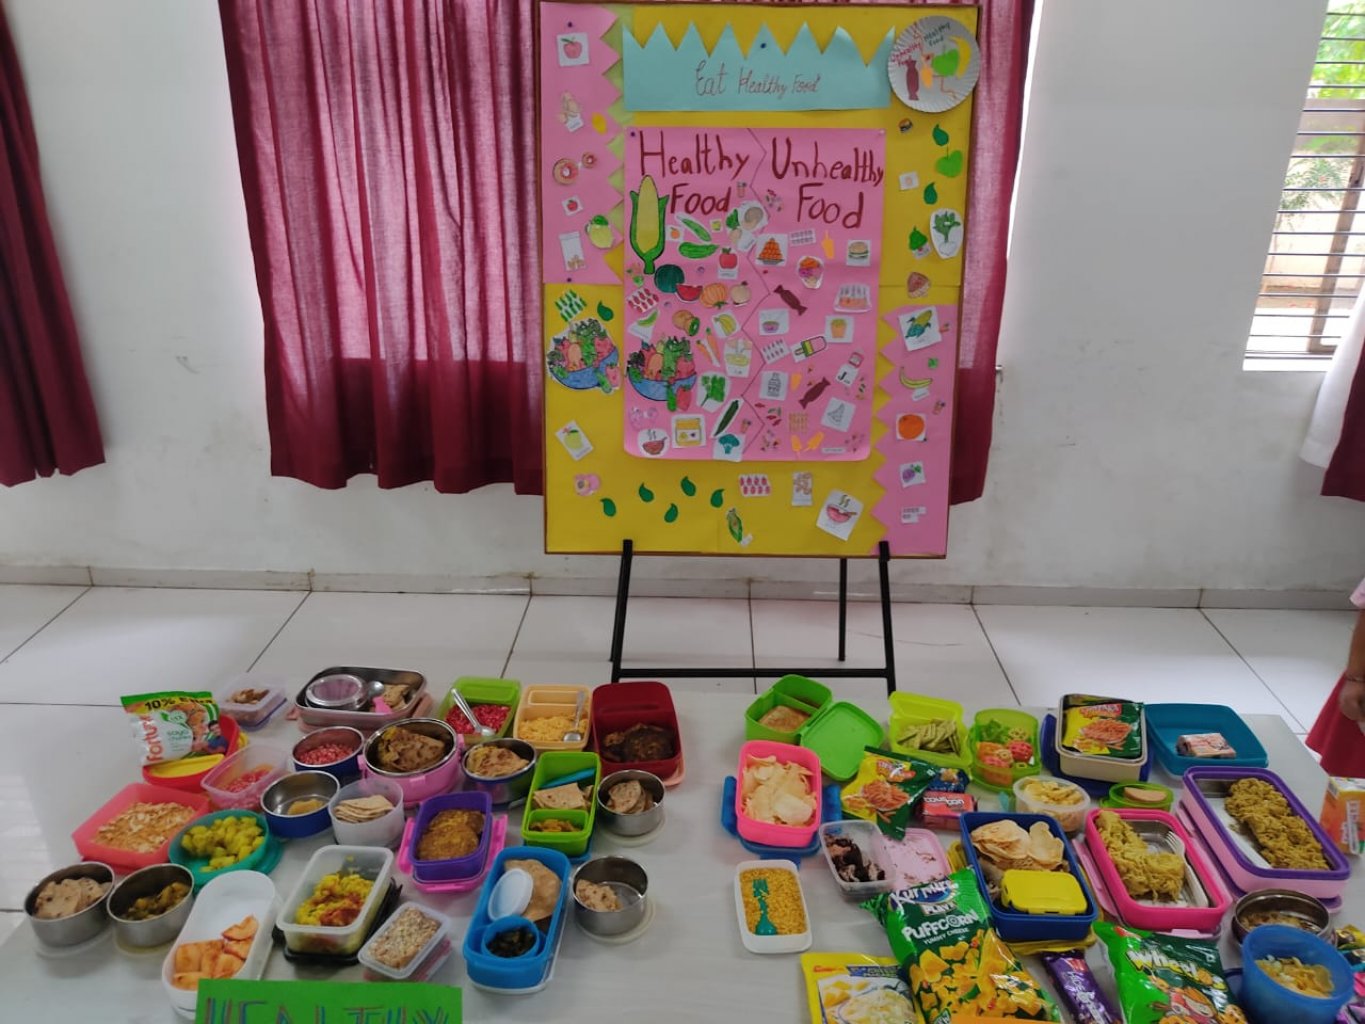 Celebrated Nutrition Day